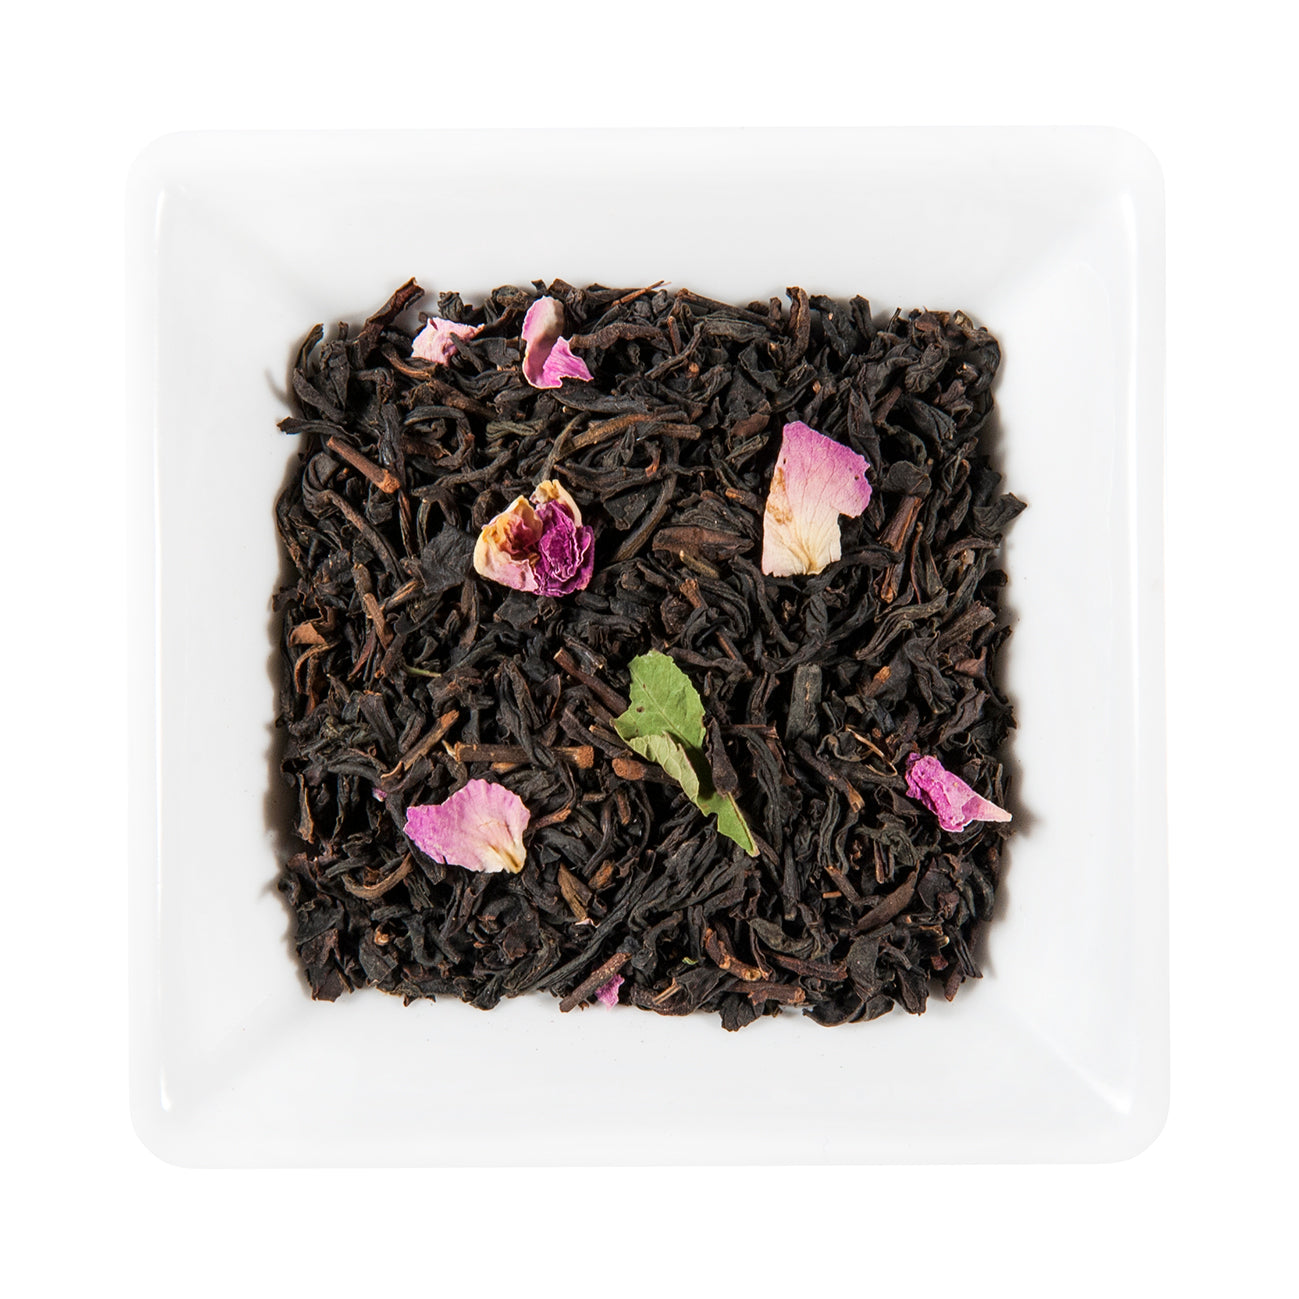 Earl Grey Special Reserve, Black Tea flavored with Bergamot Oil and Rose Petals, Miami.Coffee